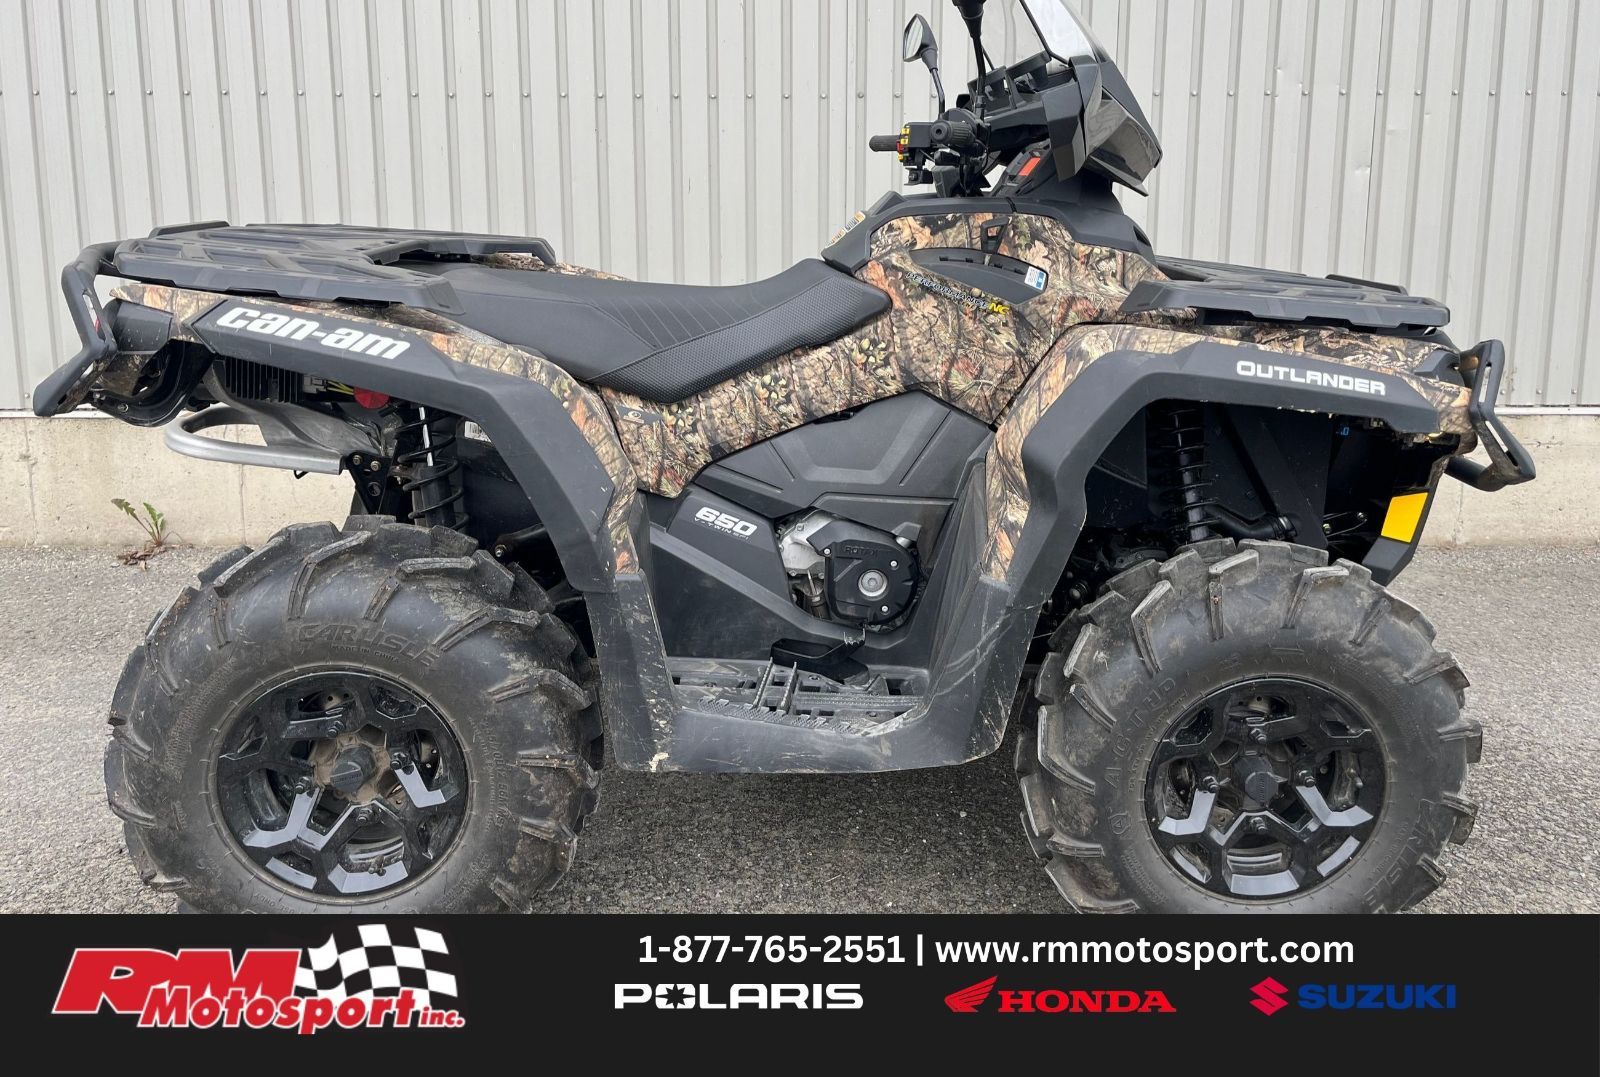 RM Motosport | Atv Can-Am OUTLANDER XT 650 in our Complete